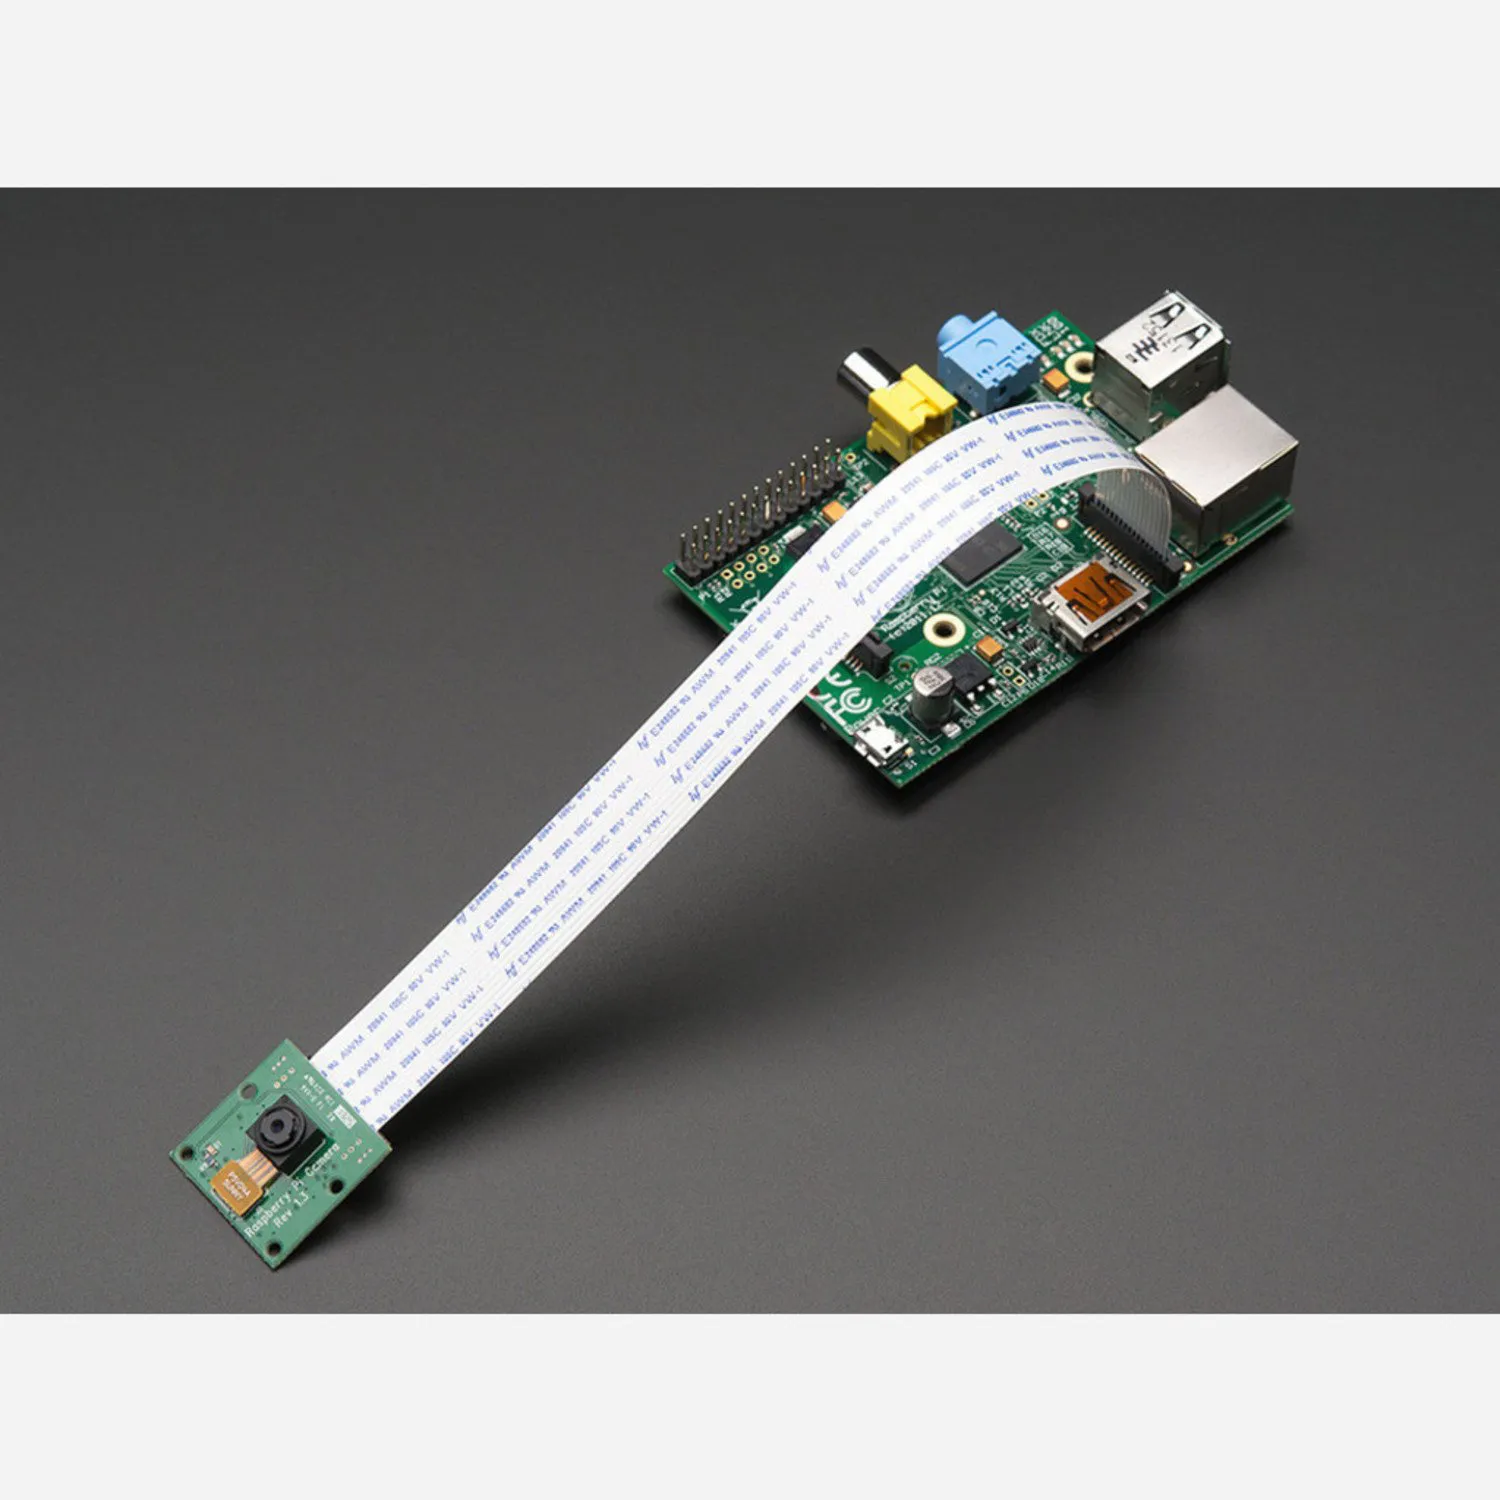 Photo of Flex Cable for Raspberry Pi Camera - 200mm / 8